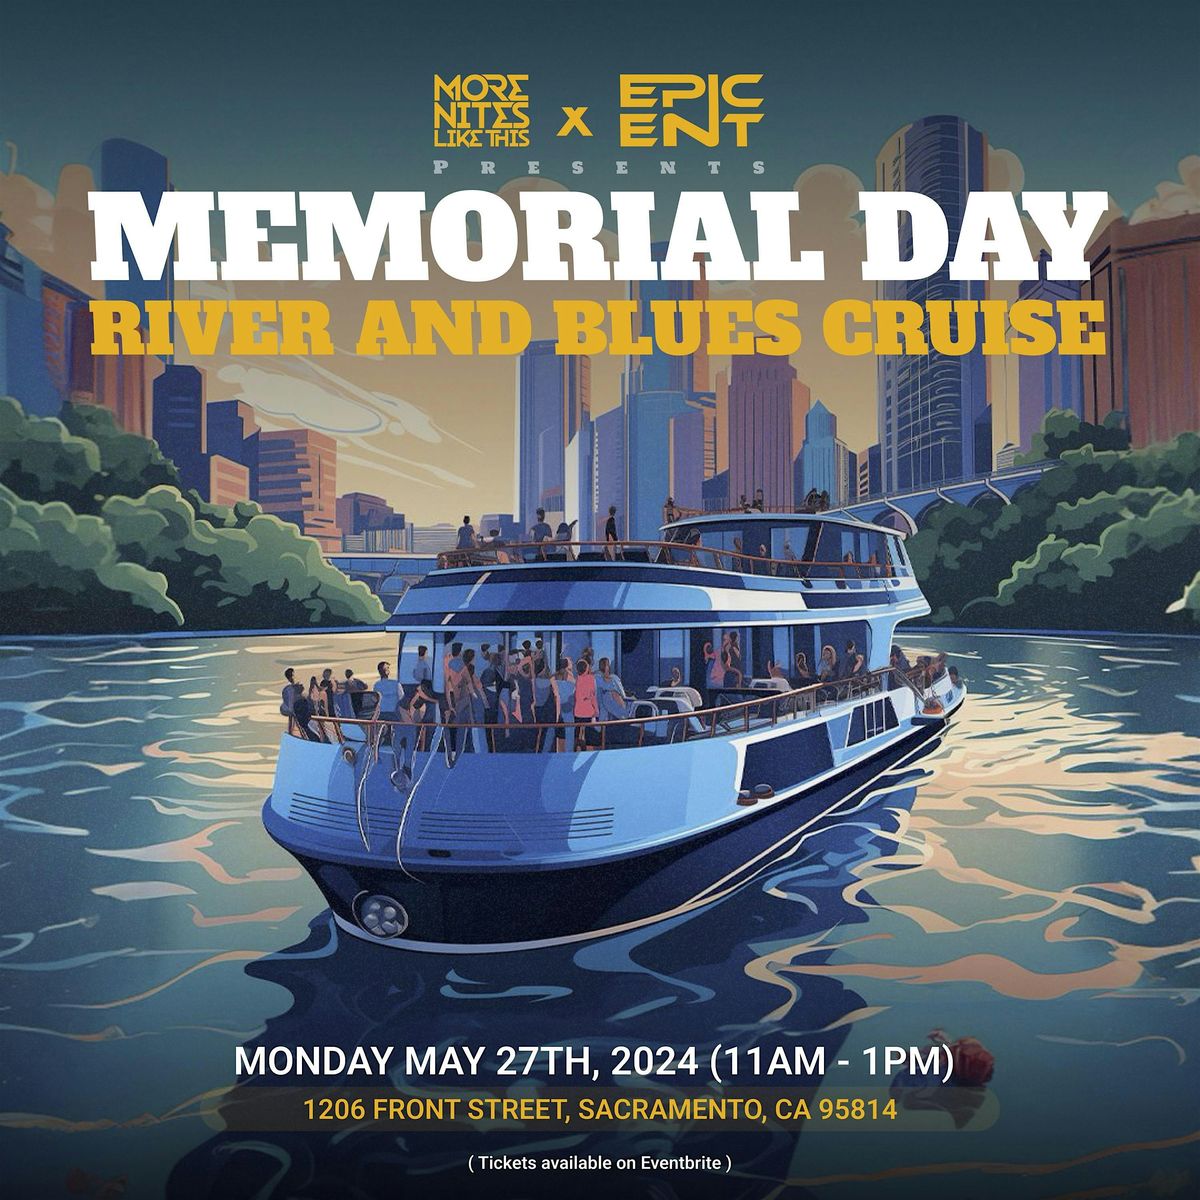 Memorial Day "River & Blues" Cruise Presented By MNLT X EPIC ENT